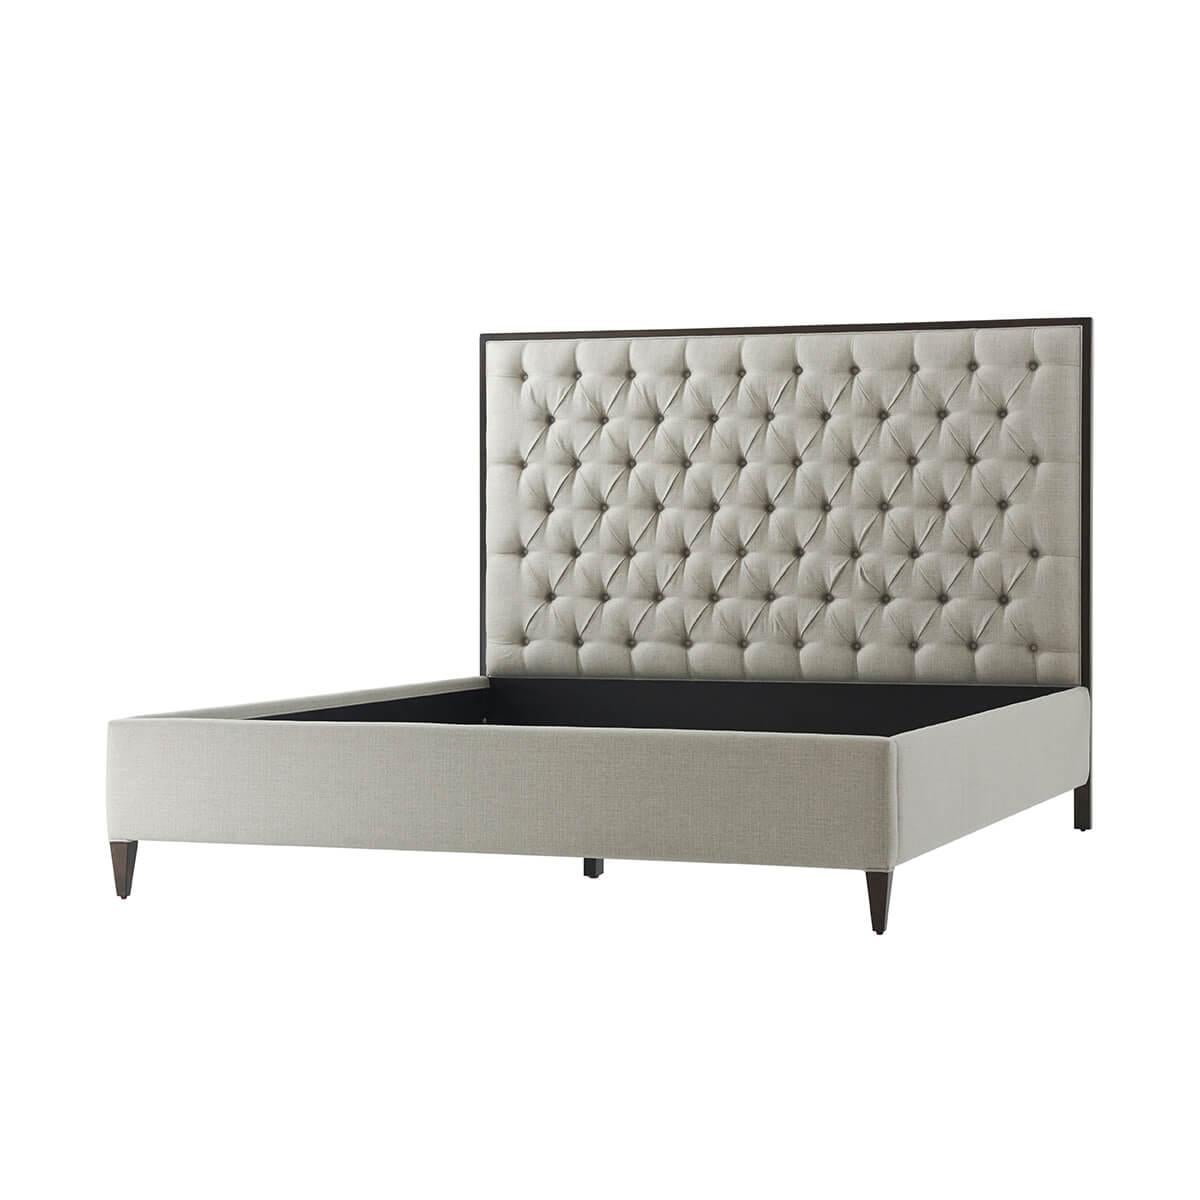 Vietnamese Classic Modern California King Size Bed For Sale